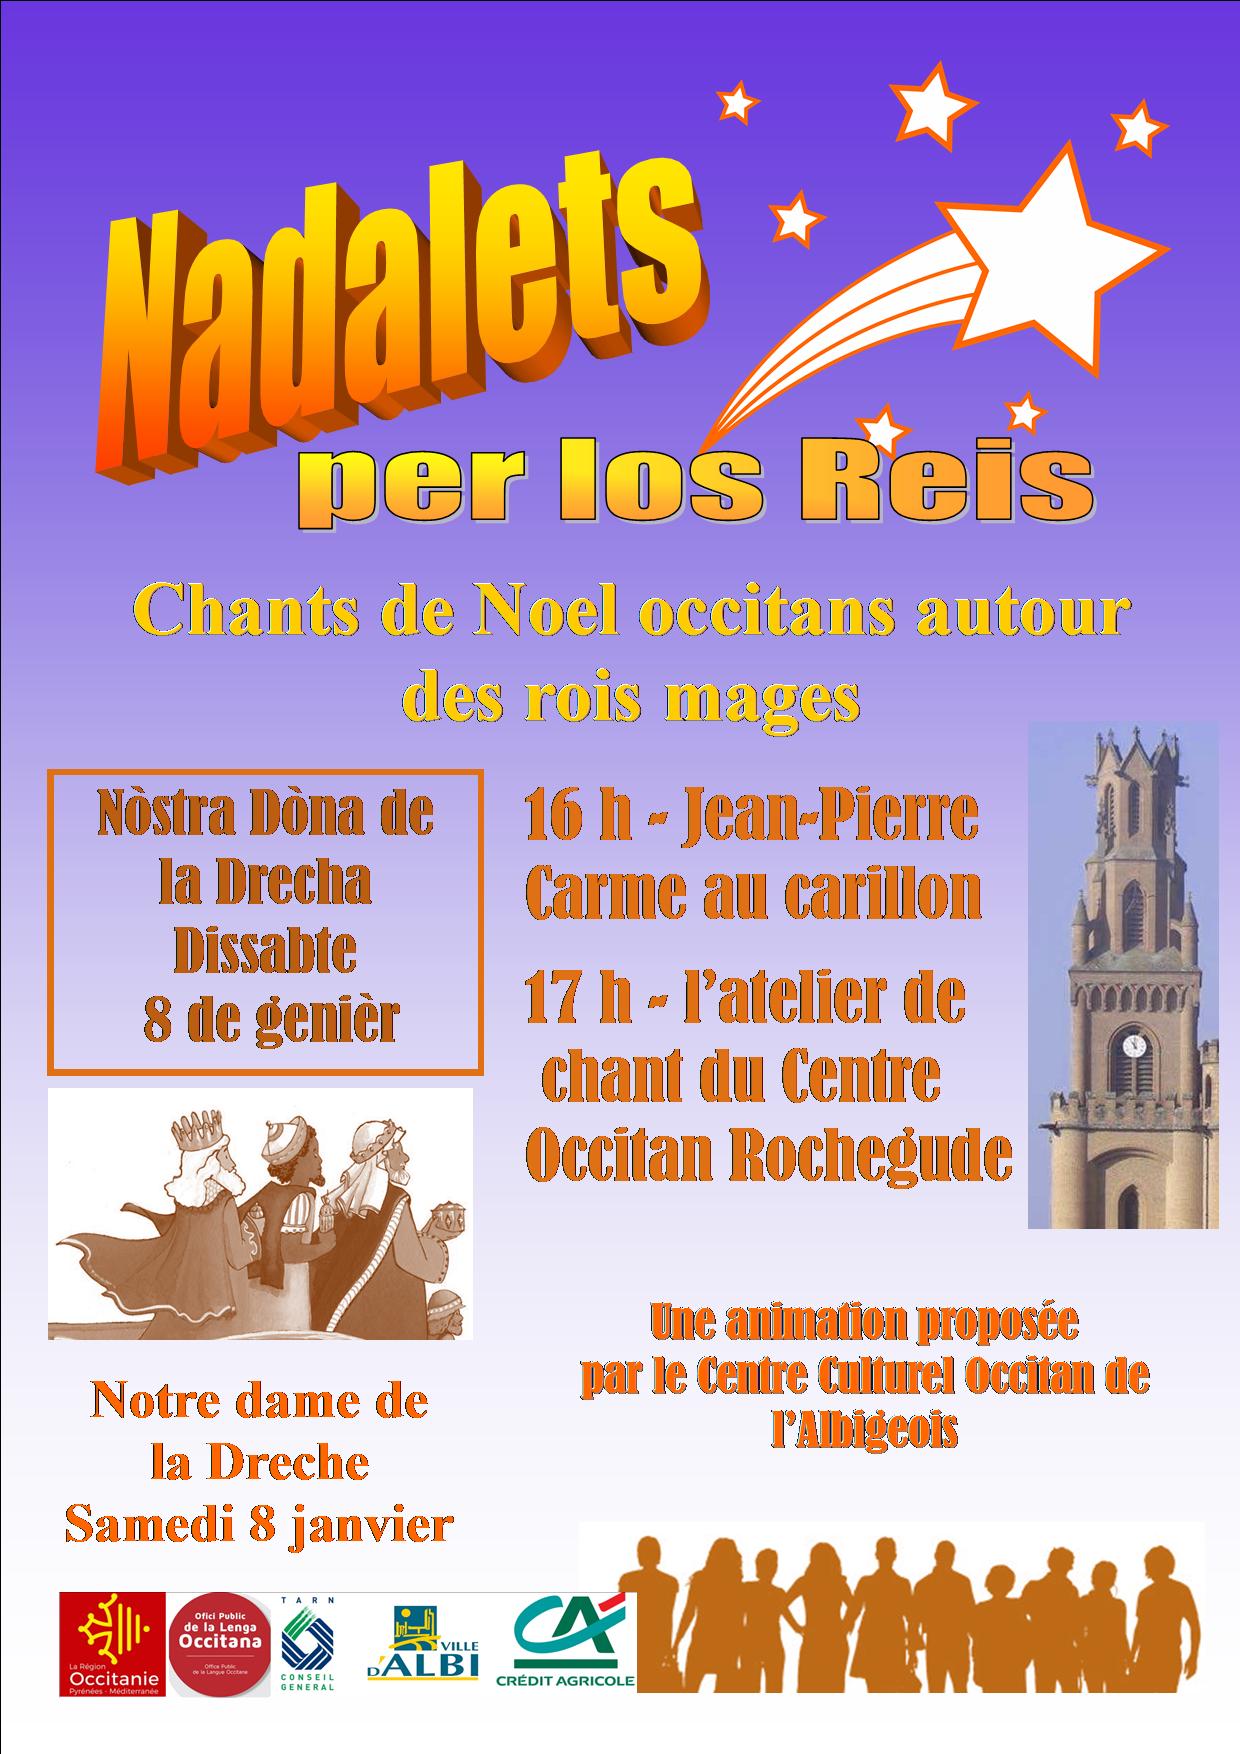 You are currently viewing Nadalets per los Reis